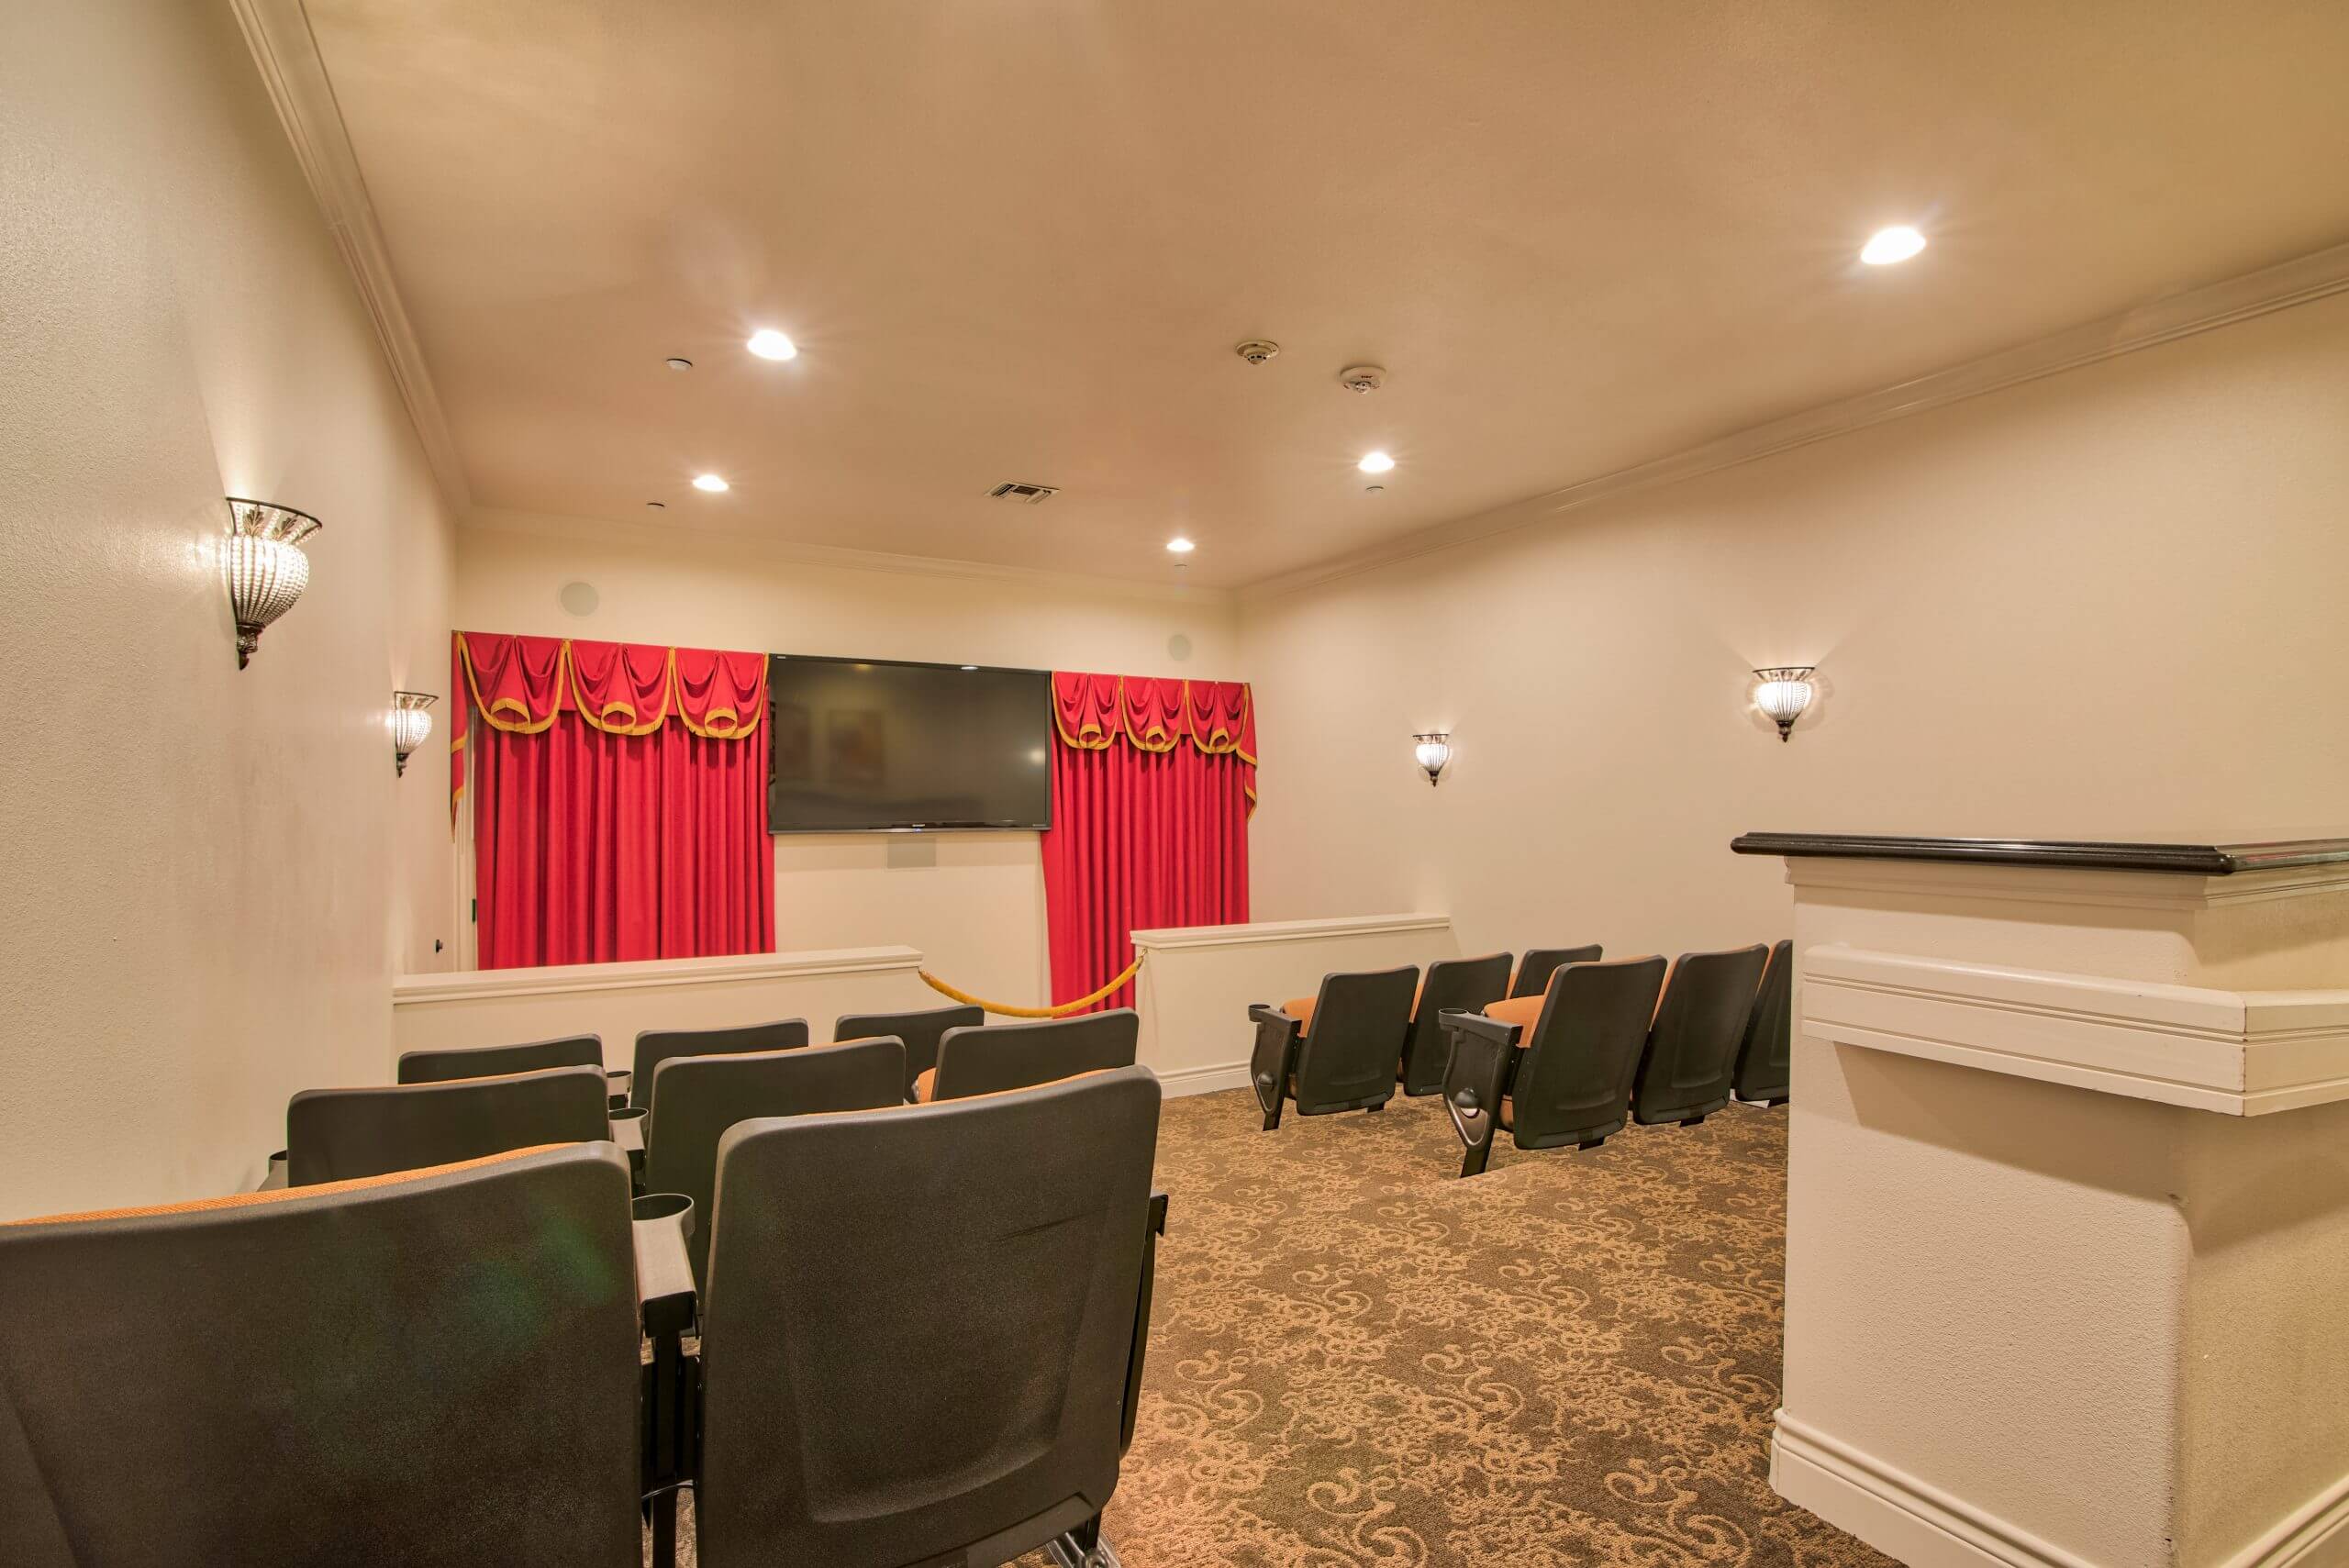 Theater room at Pelican Bay Assisted Living and memory care community in Beaumont, TX